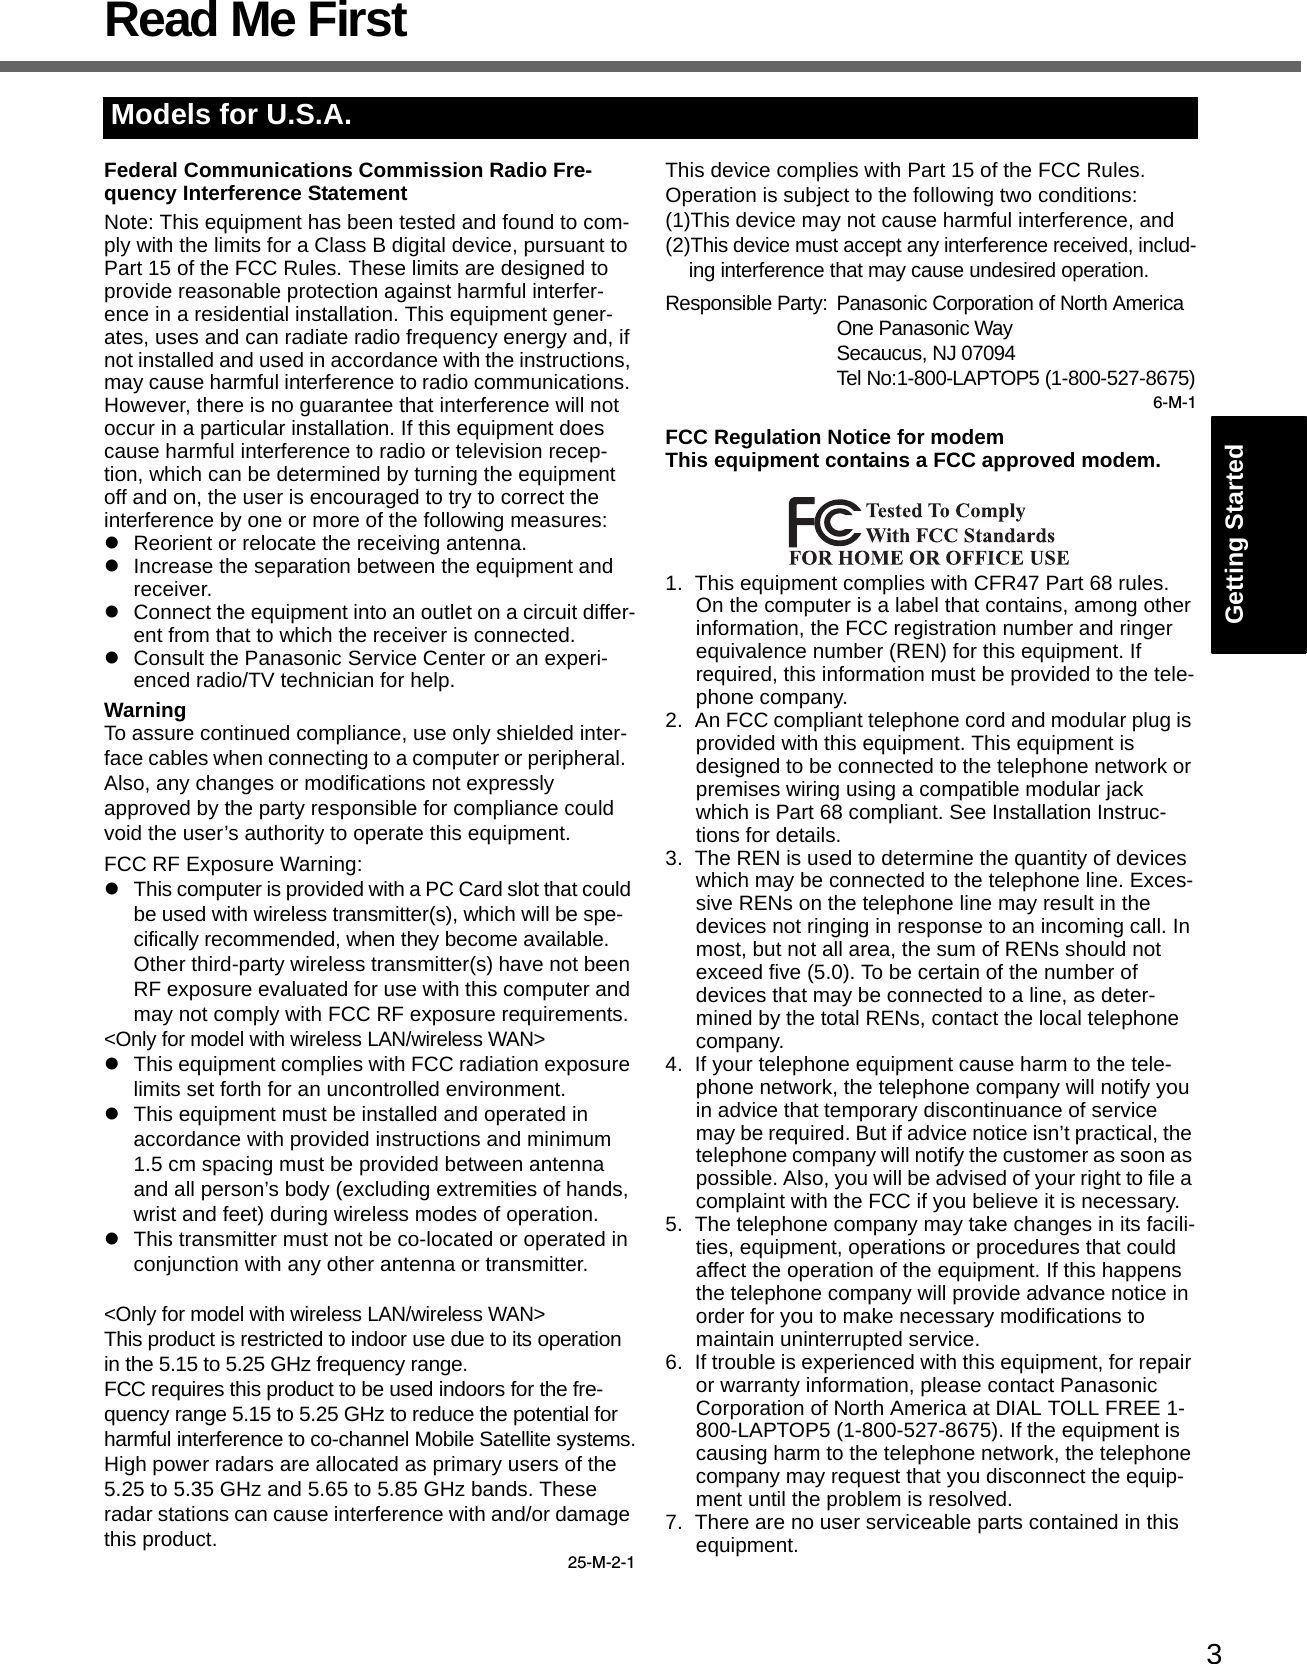 3Getting StartedUseful InformationTroubleshootingAppendixRead Me FirstFederal Communications Commission Radio Fre-quency Interference StatementNote: This equipment has been tested and found to com-ply with the limits for a Class B digital device, pursuant to Part 15 of the FCC Rules. These limits are designed to provide reasonable protection against harmful interfer-ence in a residential installation. This equipment gener-ates, uses and can radiate radio frequency energy and, if not installed and used in accordance with the instructions, may cause harmful interference to radio communications. However, there is no guarantee that interference will not occur in a particular installation. If this equipment does cause harmful interference to radio or television recep-tion, which can be determined by turning the equipment off and on, the user is encouraged to try to correct the interference by one or more of the following measures:zReorient or relocate the receiving antenna.zIncrease the separation between the equipment and receiver.zConnect the equipment into an outlet on a circuit differ-ent from that to which the receiver is connected.zConsult the Panasonic Service Center or an experi-enced radio/TV technician for help.WarningTo assure continued compliance, use only shielded inter-face cables when connecting to a computer or peripheral.  Also, any changes or modifications not expressly approved by the party responsible for compliance could void the user’s authority to operate this equipment.FCC RF Exposure Warning:zThis computer is provided with a PC Card slot that could be used with wireless transmitter(s), which will be spe-cifically recommended, when they become available.Other third-party wireless transmitter(s) have not been RF exposure evaluated for use with this computer and may not comply with FCC RF exposure requirements.&lt;Only for model with wireless LAN/wireless WAN&gt;zThis equipment complies with FCC radiation exposure limits set forth for an uncontrolled environment.zThis equipment must be installed and operated in accordance with provided instructions and minimum 1.5 cm spacing must be provided between antenna and all person’s body (excluding extremities of hands, wrist and feet) during wireless modes of operation.zThis transmitter must not be co-located or operated in conjunction with any other antenna or transmitter.&lt;Only for model with wireless LAN/wireless WAN&gt;This product is restricted to indoor use due to its operation in the 5.15 to 5.25 GHz frequency range.FCC requires this product to be used indoors for the fre-quency range 5.15 to 5.25 GHz to reduce the potential for harmful interference to co-channel Mobile Satellite systems.High power radars are allocated as primary users of the 5.25 to 5.35 GHz and 5.65 to 5.85 GHz bands. These radar stations can cause interference with and/or damage this product.25-M-2-1This device complies with Part 15 of the FCC Rules.  Operation is subject to the following two conditions:(1)This device may not cause harmful interference, and(2)This device must accept any interference received, includ-ing interference that may cause undesired operation.Responsible Party: Panasonic Corporation of North AmericaOne Panasonic WaySecaucus, NJ 07094Tel No:1-800-LAPTOP5 (1-800-527-8675)6-M-1FCC Regulation Notice for modemThis equipment contains a FCC approved modem.1. This equipment complies with CFR47 Part 68 rules. On the computer is a label that contains, among other information, the FCC registration number and ringer equivalence number (REN) for this equipment. If required, this information must be provided to the tele-phone company.2. An FCC compliant telephone cord and modular plug is provided with this equipment. This equipment is designed to be connected to the telephone network or premises wiring using a compatible modular jack which is Part 68 compliant. See Installation Instruc-tions for details.3. The REN is used to determine the quantity of devices which may be connected to the telephone line. Exces-sive RENs on the telephone line may result in the devices not ringing in response to an incoming call. In most, but not all area, the sum of RENs should not exceed five (5.0). To be certain of the number of devices that may be connected to a line, as deter-mined by the total RENs, contact the local telephone company.4. If your telephone equipment cause harm to the tele-phone network, the telephone company will notify you in advice that temporary discontinuance of service may be required. But if advice notice isn’t practical, the telephone company will notify the customer as soon as possible. Also, you will be advised of your right to file a complaint with the FCC if you believe it is necessary.5. The telephone company may take changes in its facili-ties, equipment, operations or procedures that could affect the operation of the equipment. If this happens the telephone company will provide advance notice in order for you to make necessary modifications to maintain uninterrupted service.6. If trouble is experienced with this equipment, for repair or warranty information, please contact Panasonic Corporation of North America at DIAL TOLL FREE 1-800-LAPTOP5 (1-800-527-8675). If the equipment is causing harm to the telephone network, the telephone company may request that you disconnect the equip-ment until the problem is resolved.7. There are no user serviceable parts contained in this equipment.Models for U.S.A.